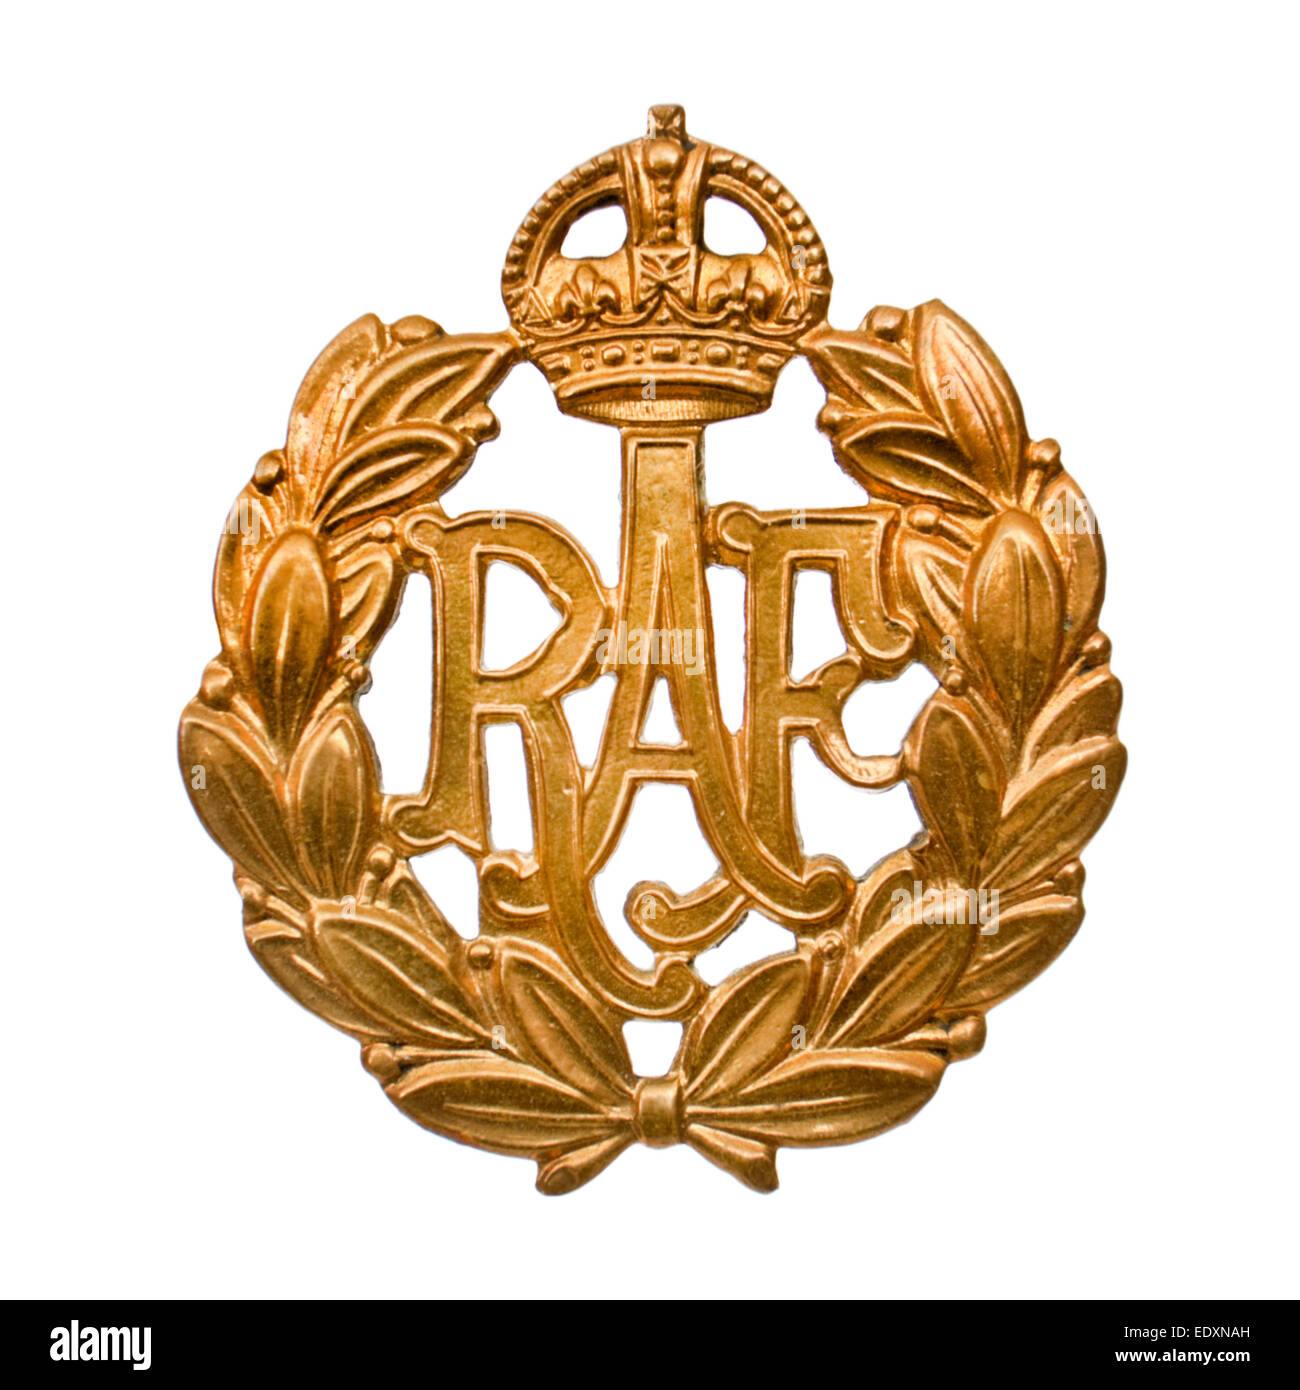 Vintage WW2 British Royal Air Force (RAF) cap badge (OR - Other Ranks type  Stock Photo - Alamy